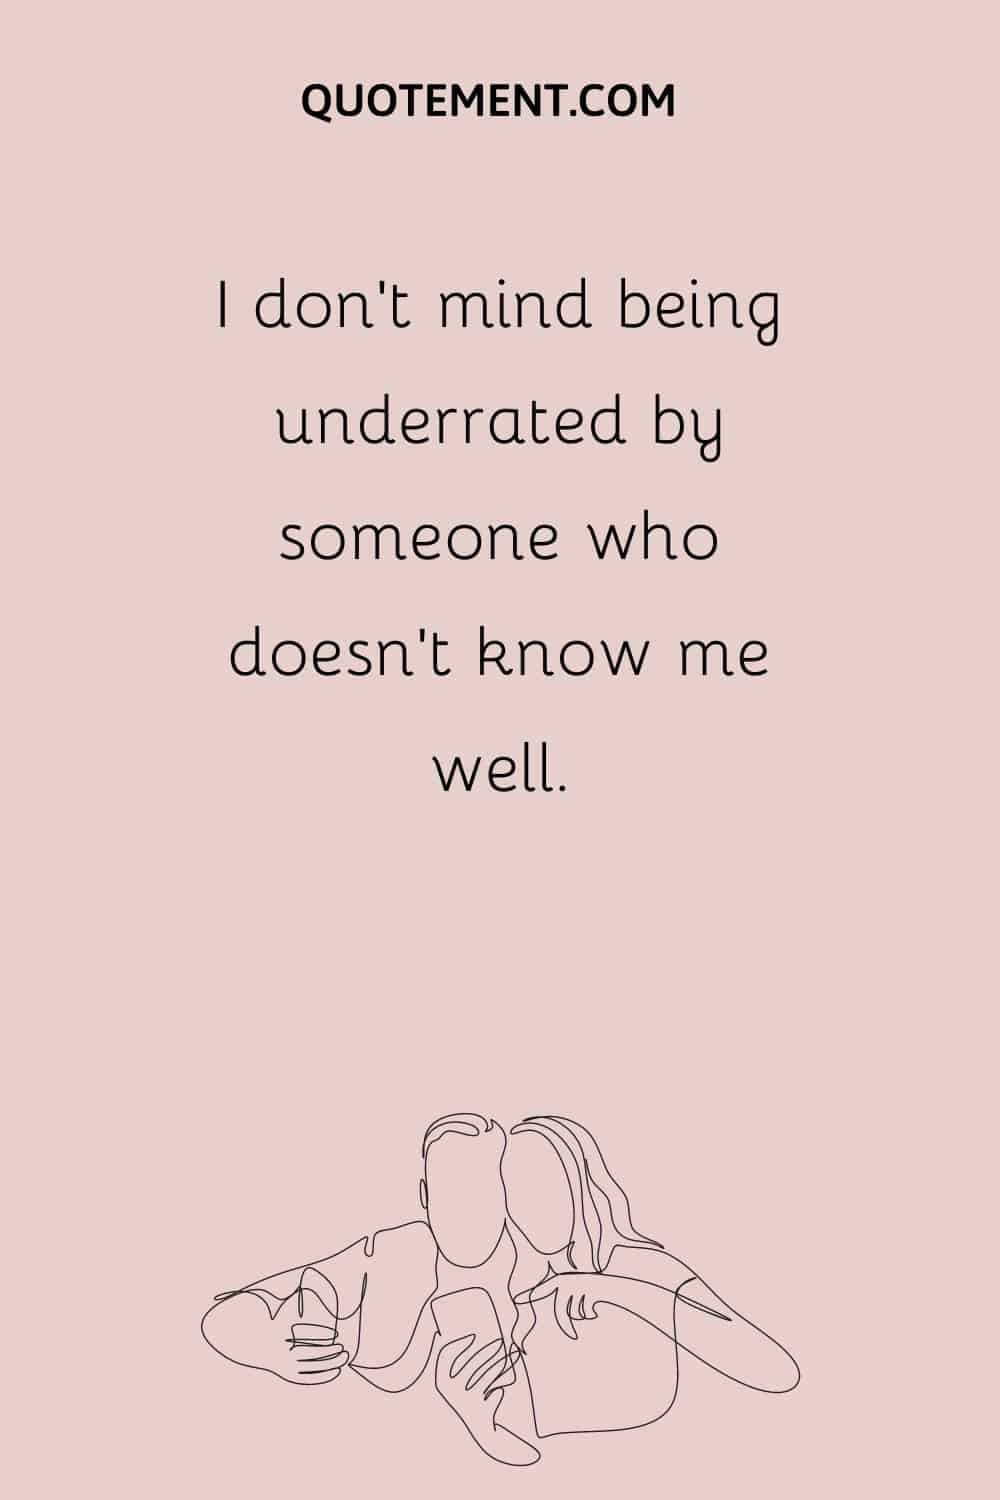 I don’t mind being underrated by someone who doesn’t know me well